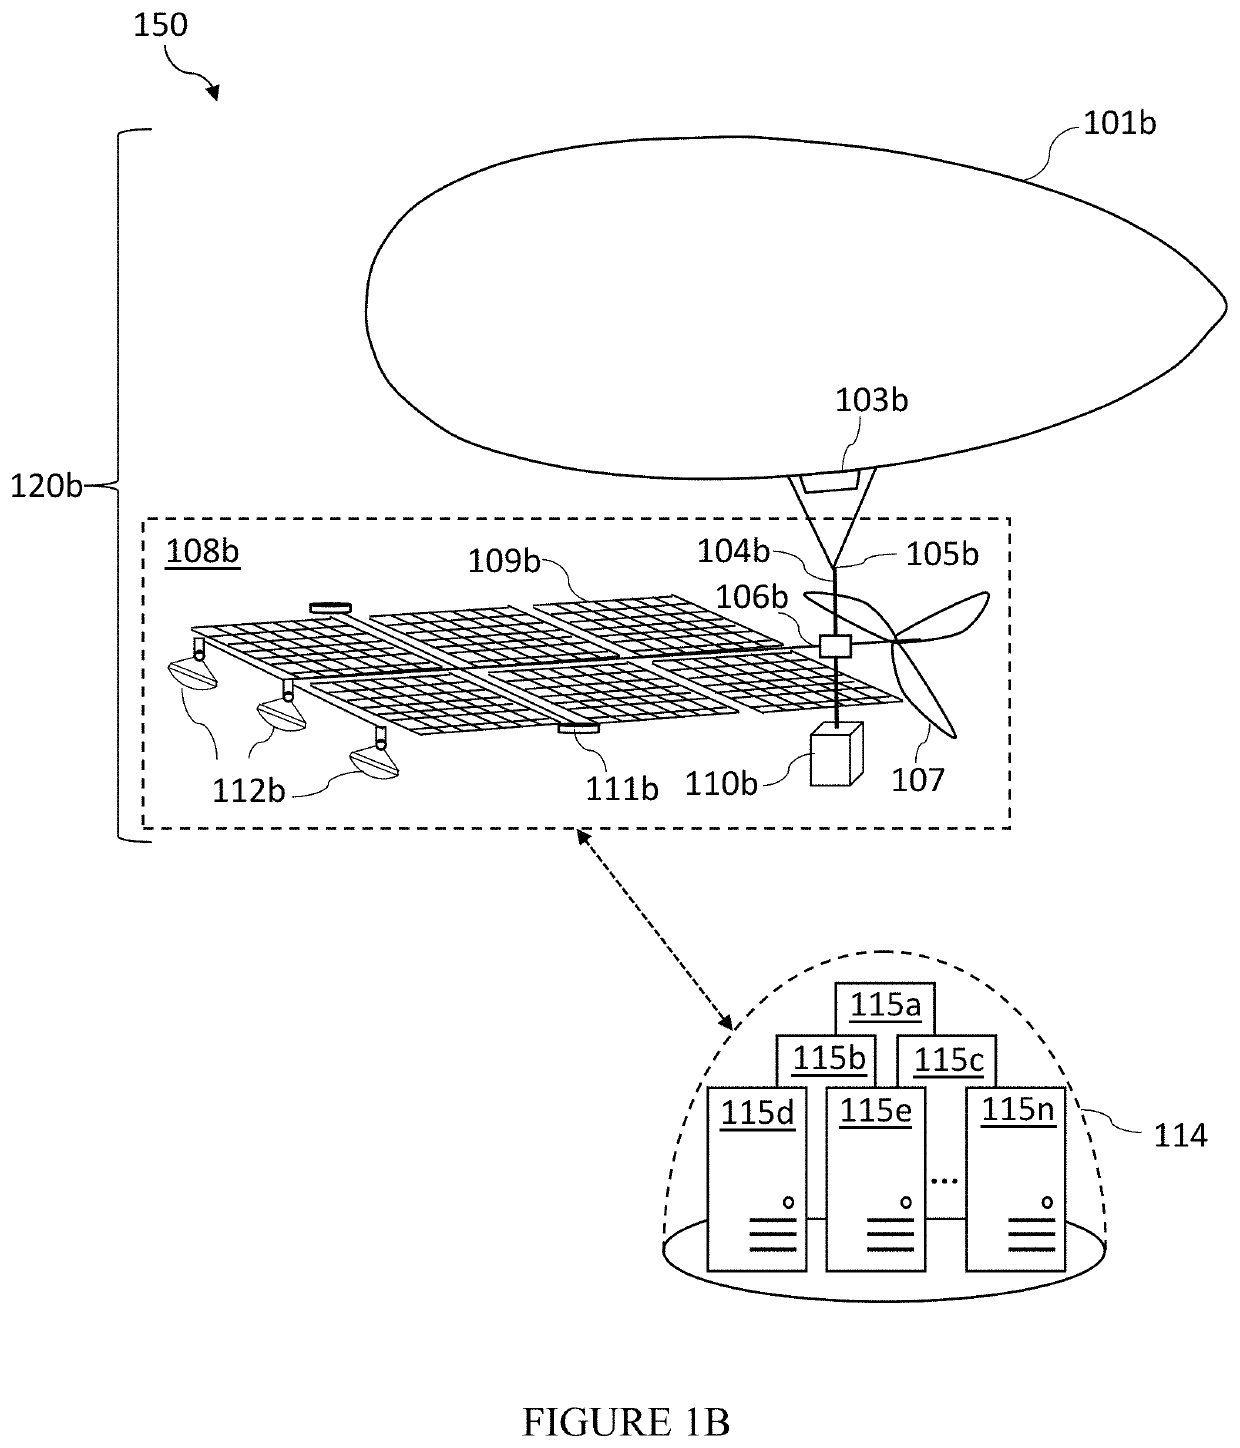 Systems and Methods for Navigating Aerial Vehicles Using Deep Reinforcement Learning